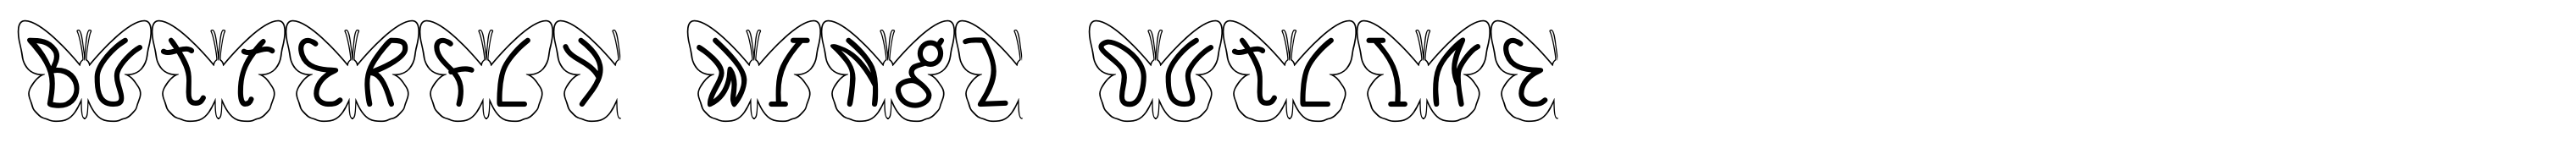 Butterfly Wingz Outline